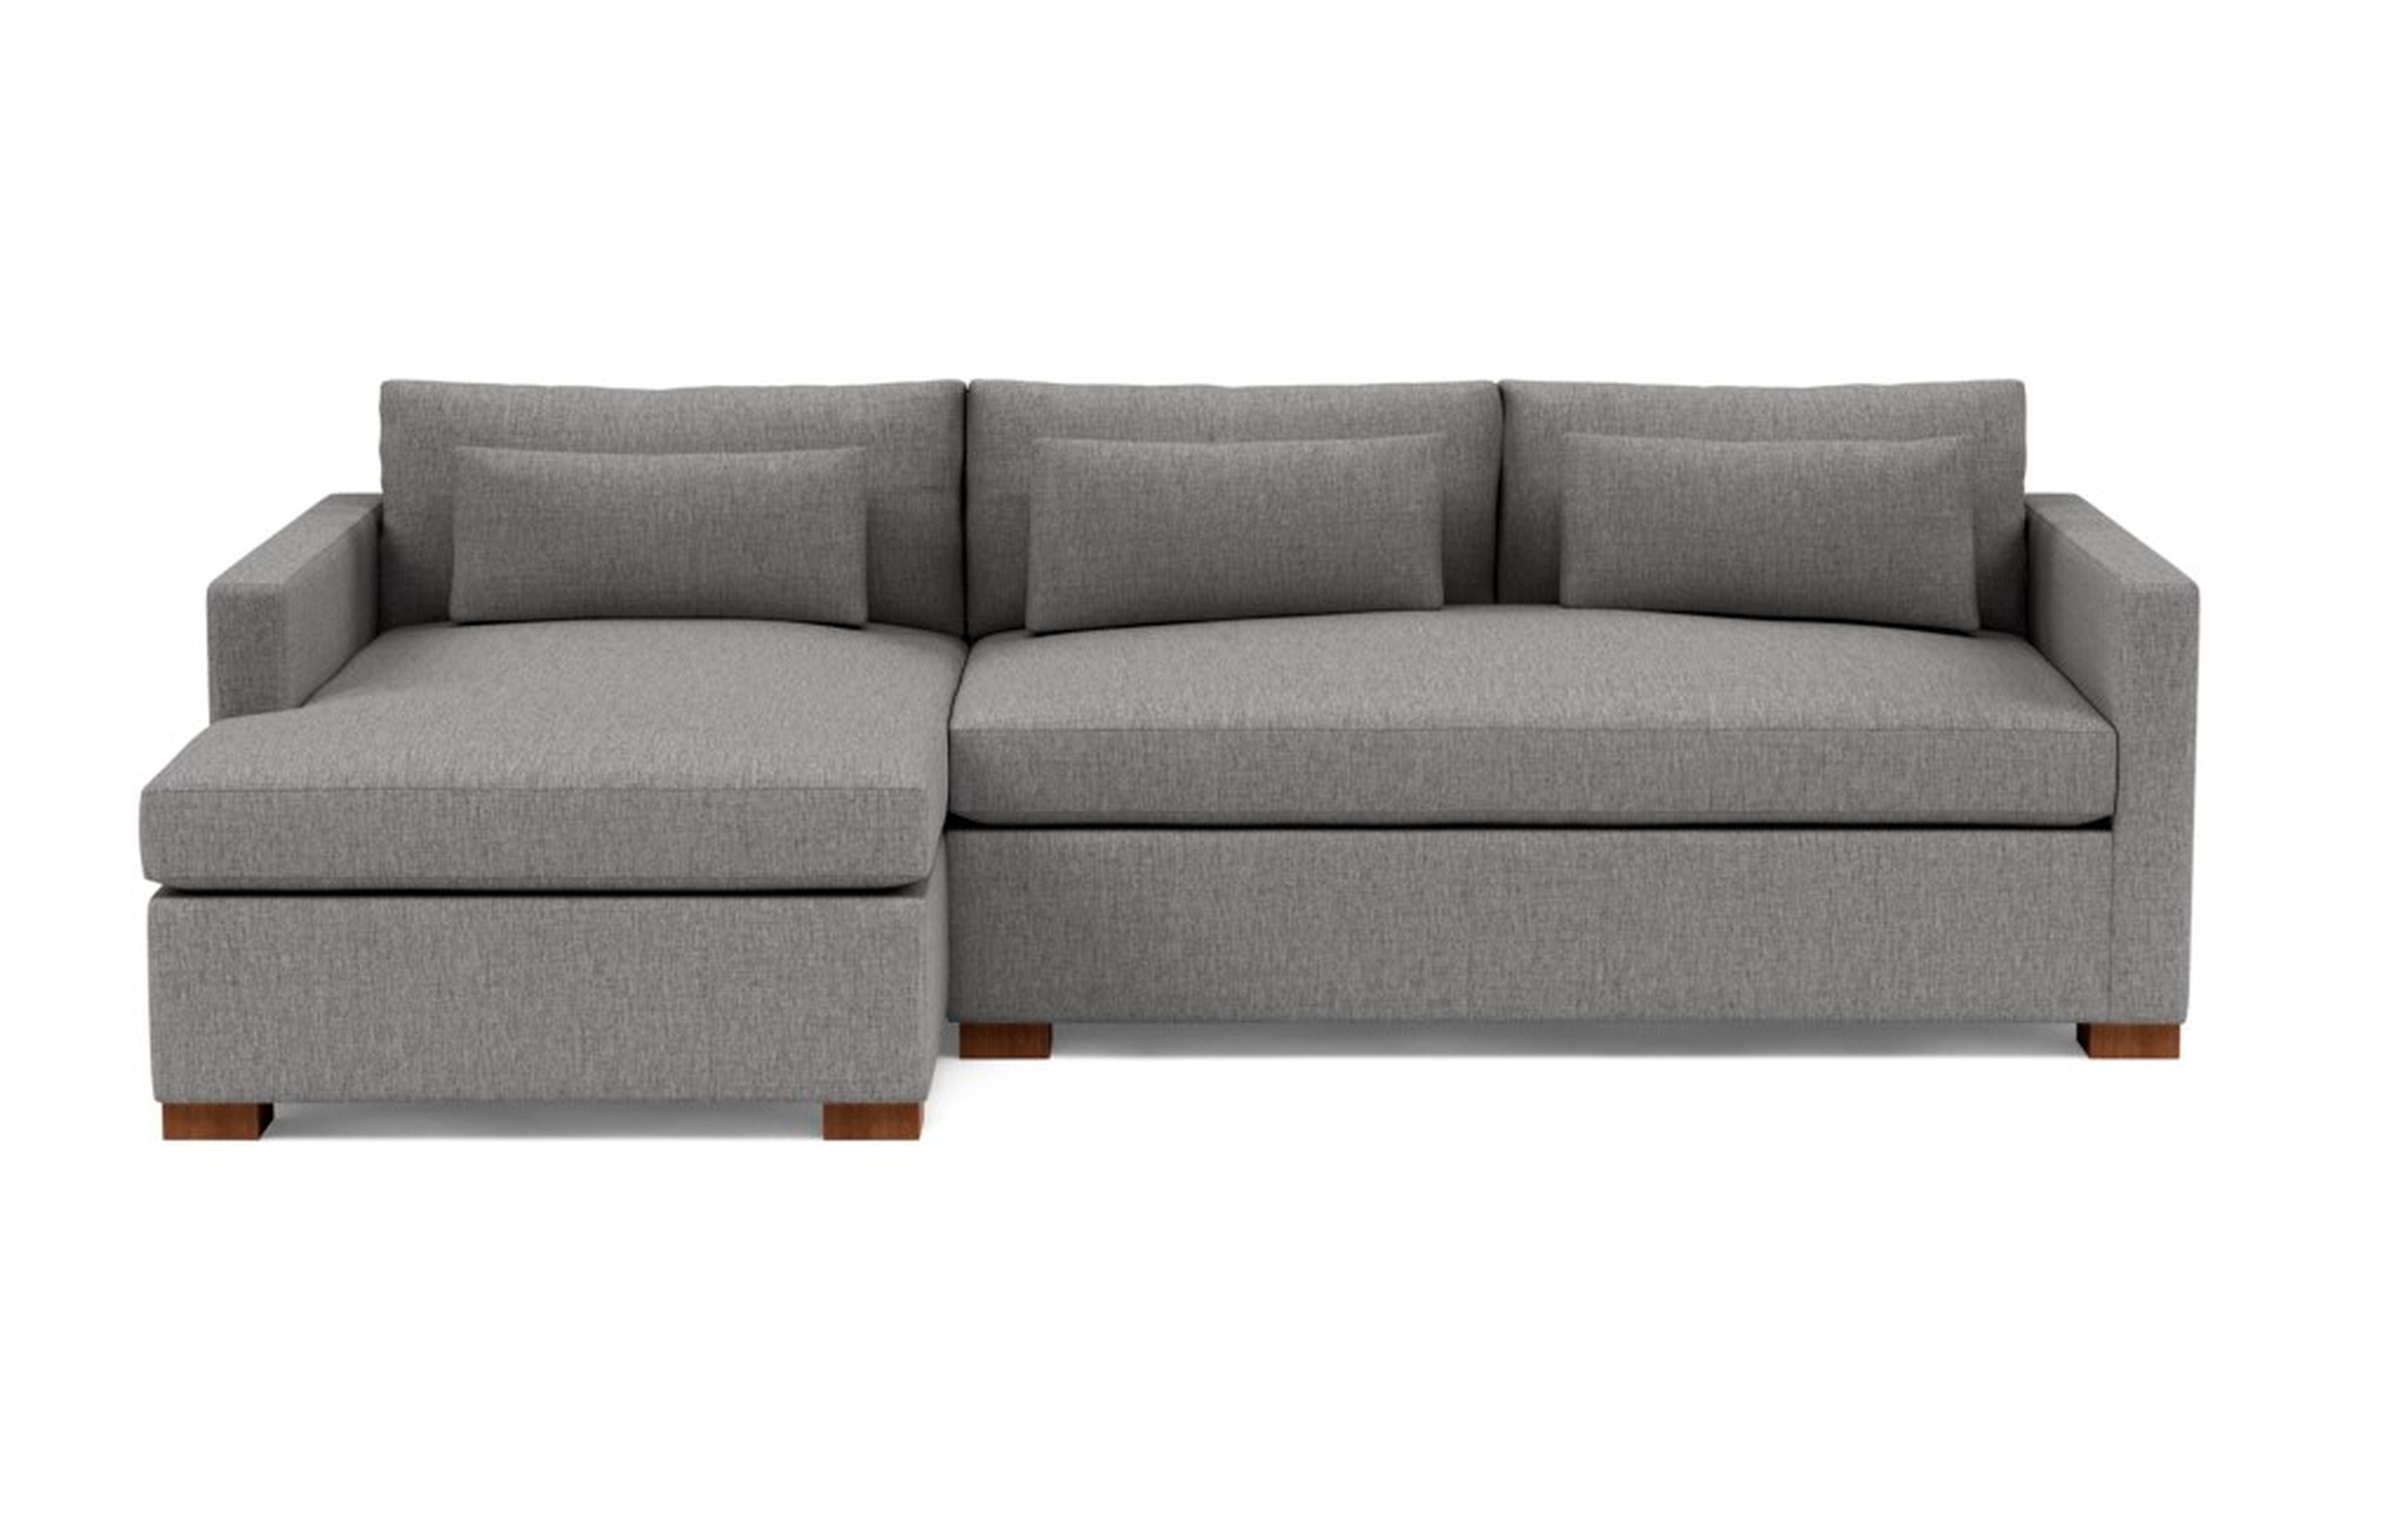 CHARLY Sectional Sofa with Left Chaise (12-14 Weeks) - Plow Cross Weave - Oiled Walnut Block Leg - 106" Sofa - Long Chaise - Bench Cushion - Standard Cushion - Interior Define